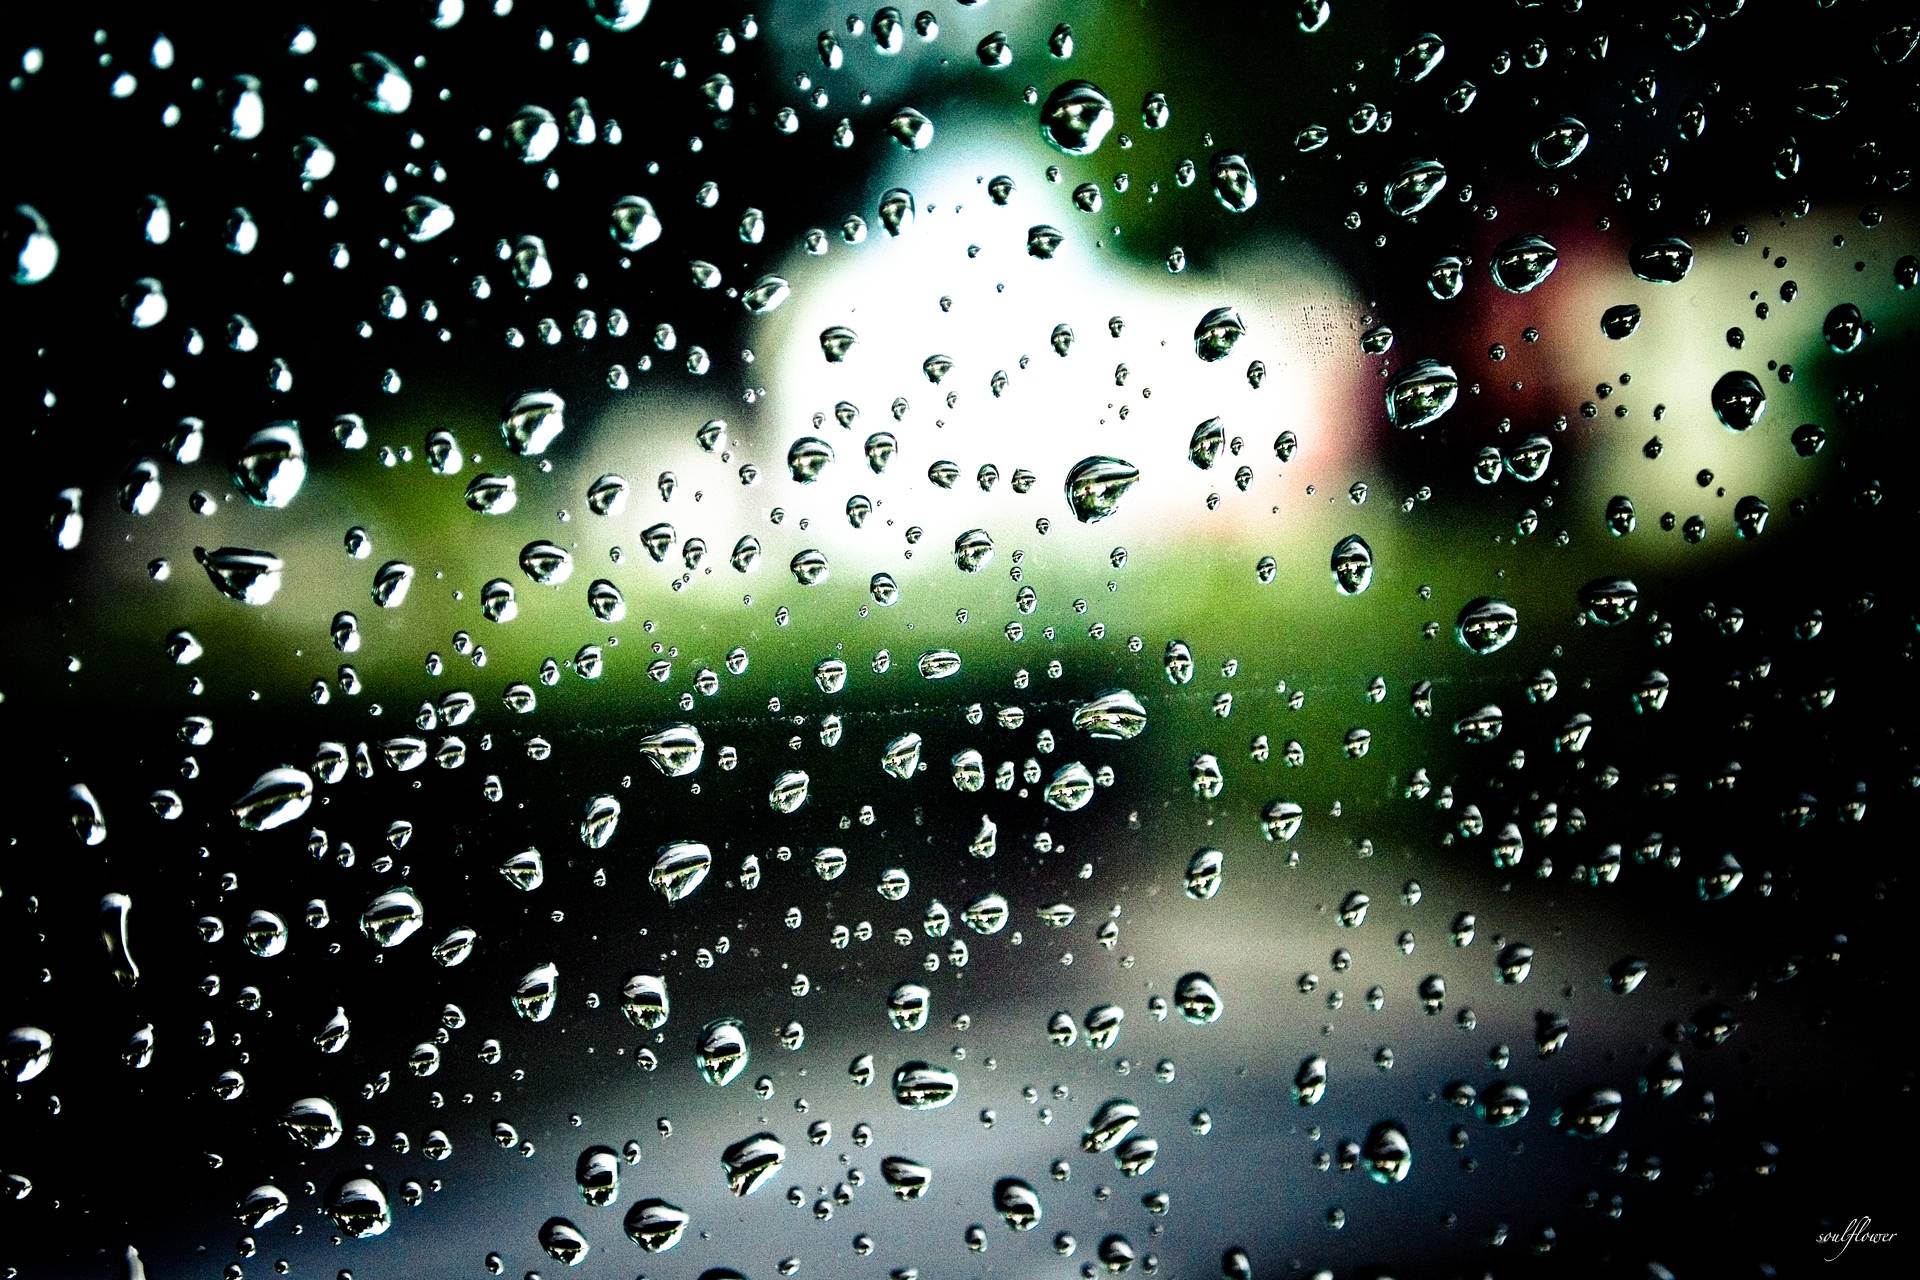 Raindrops on window wallpaper and image, picture